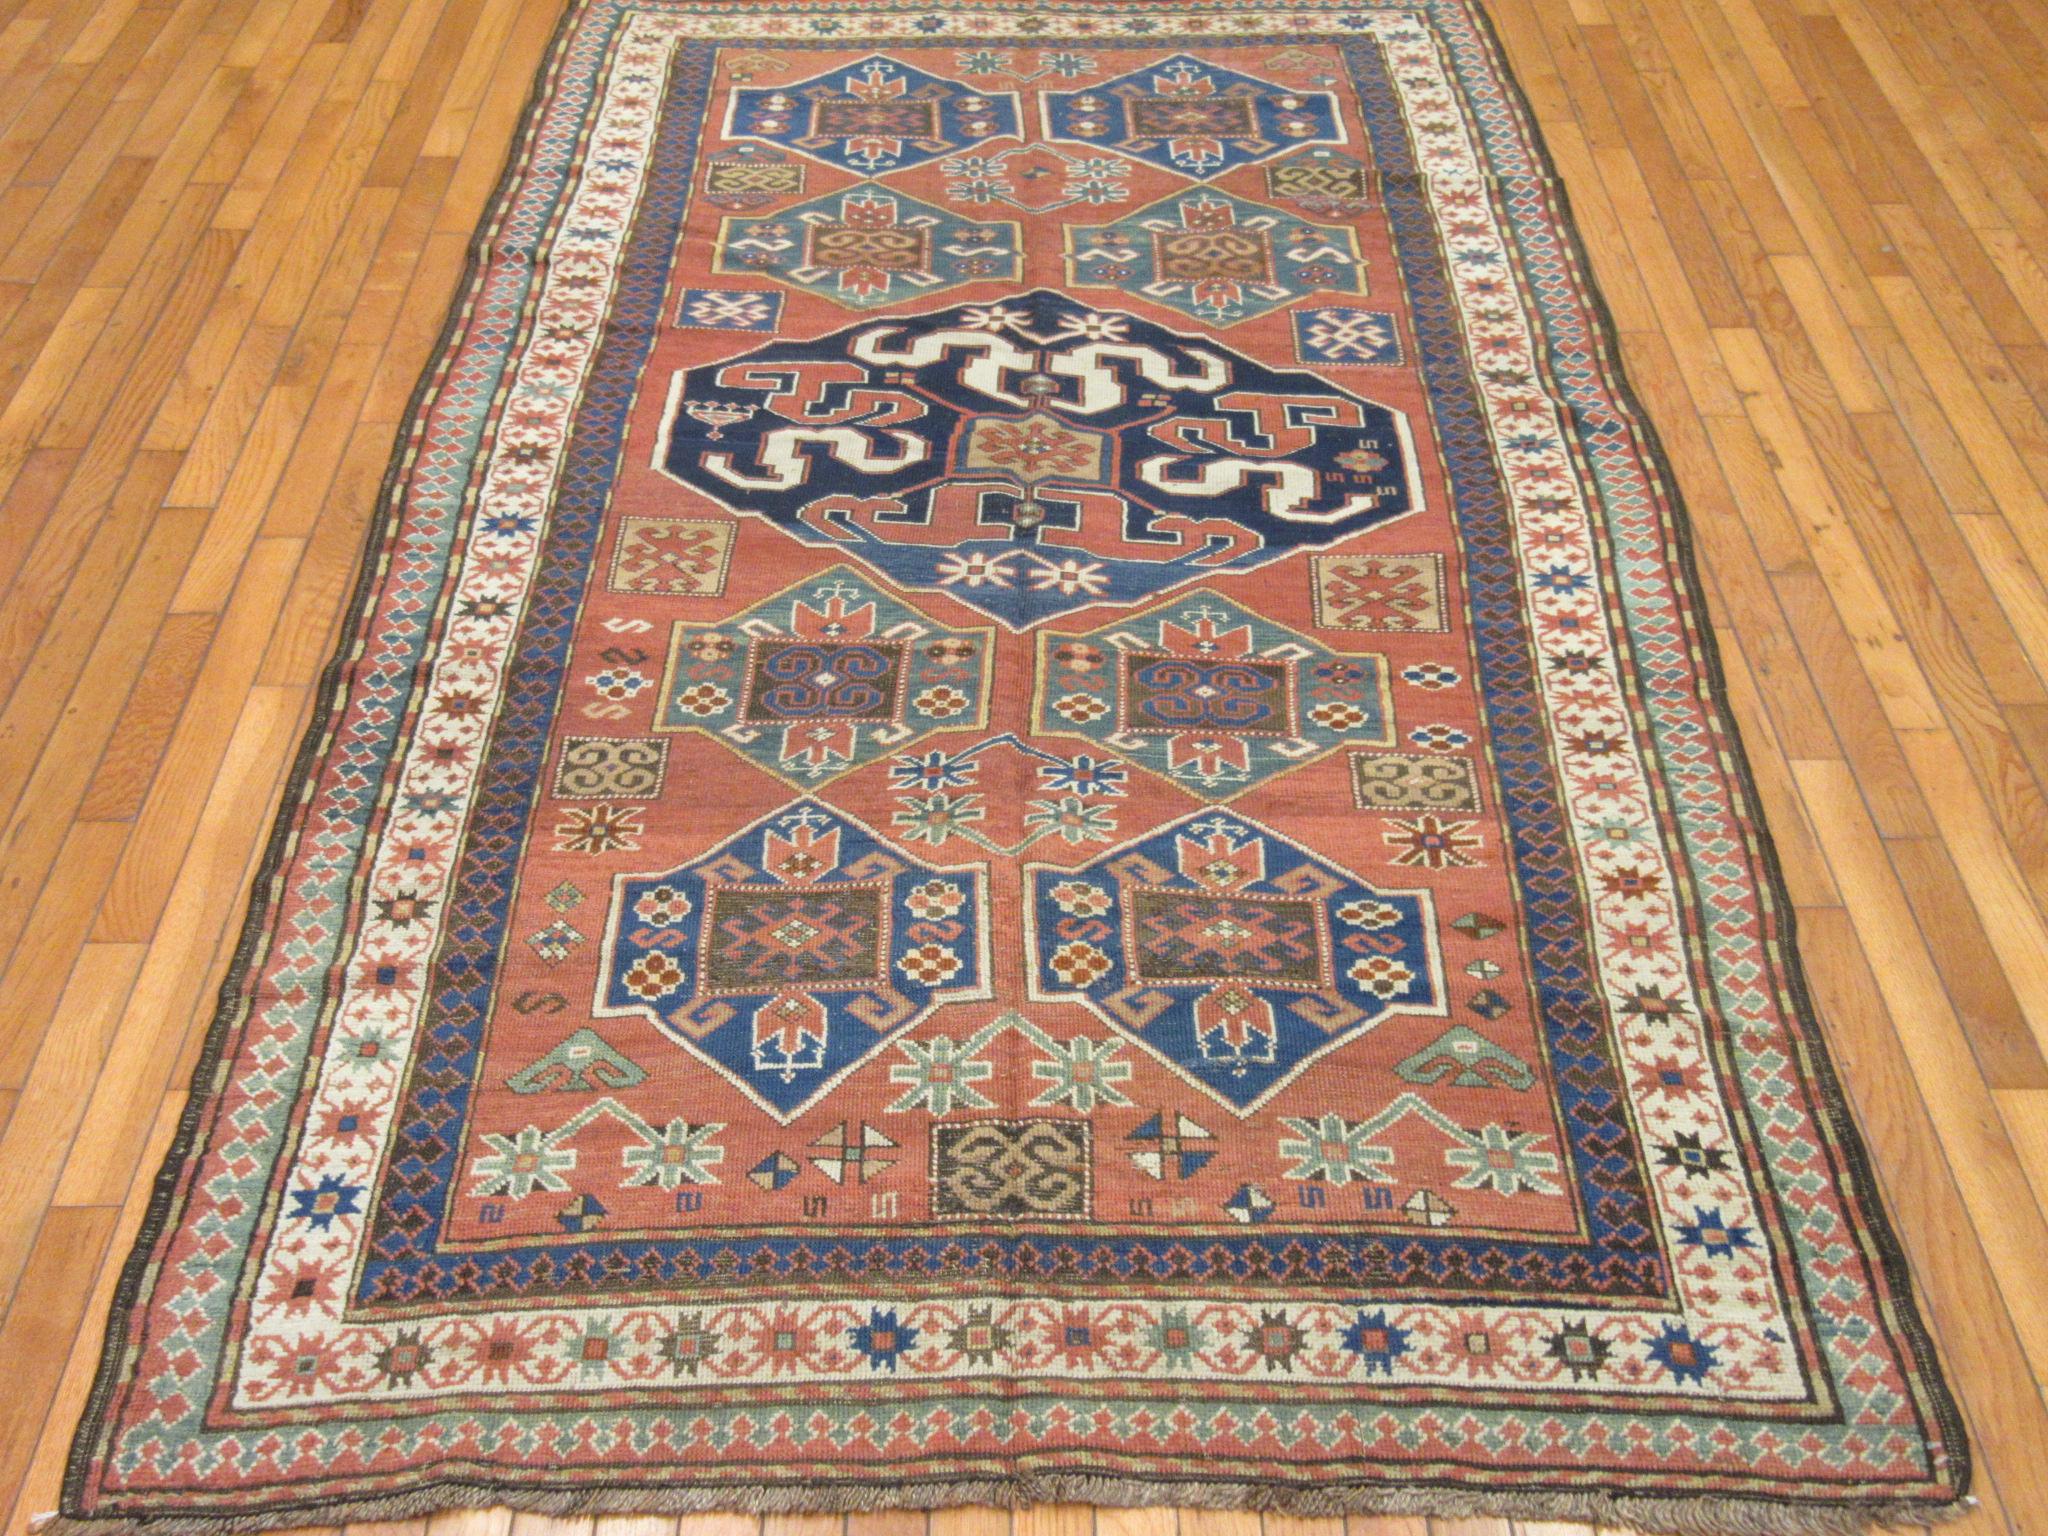 This is an antique hand knotted Caucasian rug made in the village of Kazak. It is made with wool colored with natural dyes. It has a traditional multi medallion geometric pattern on a rusty red color field. The rug measures
4' 8'' x 8' and in very